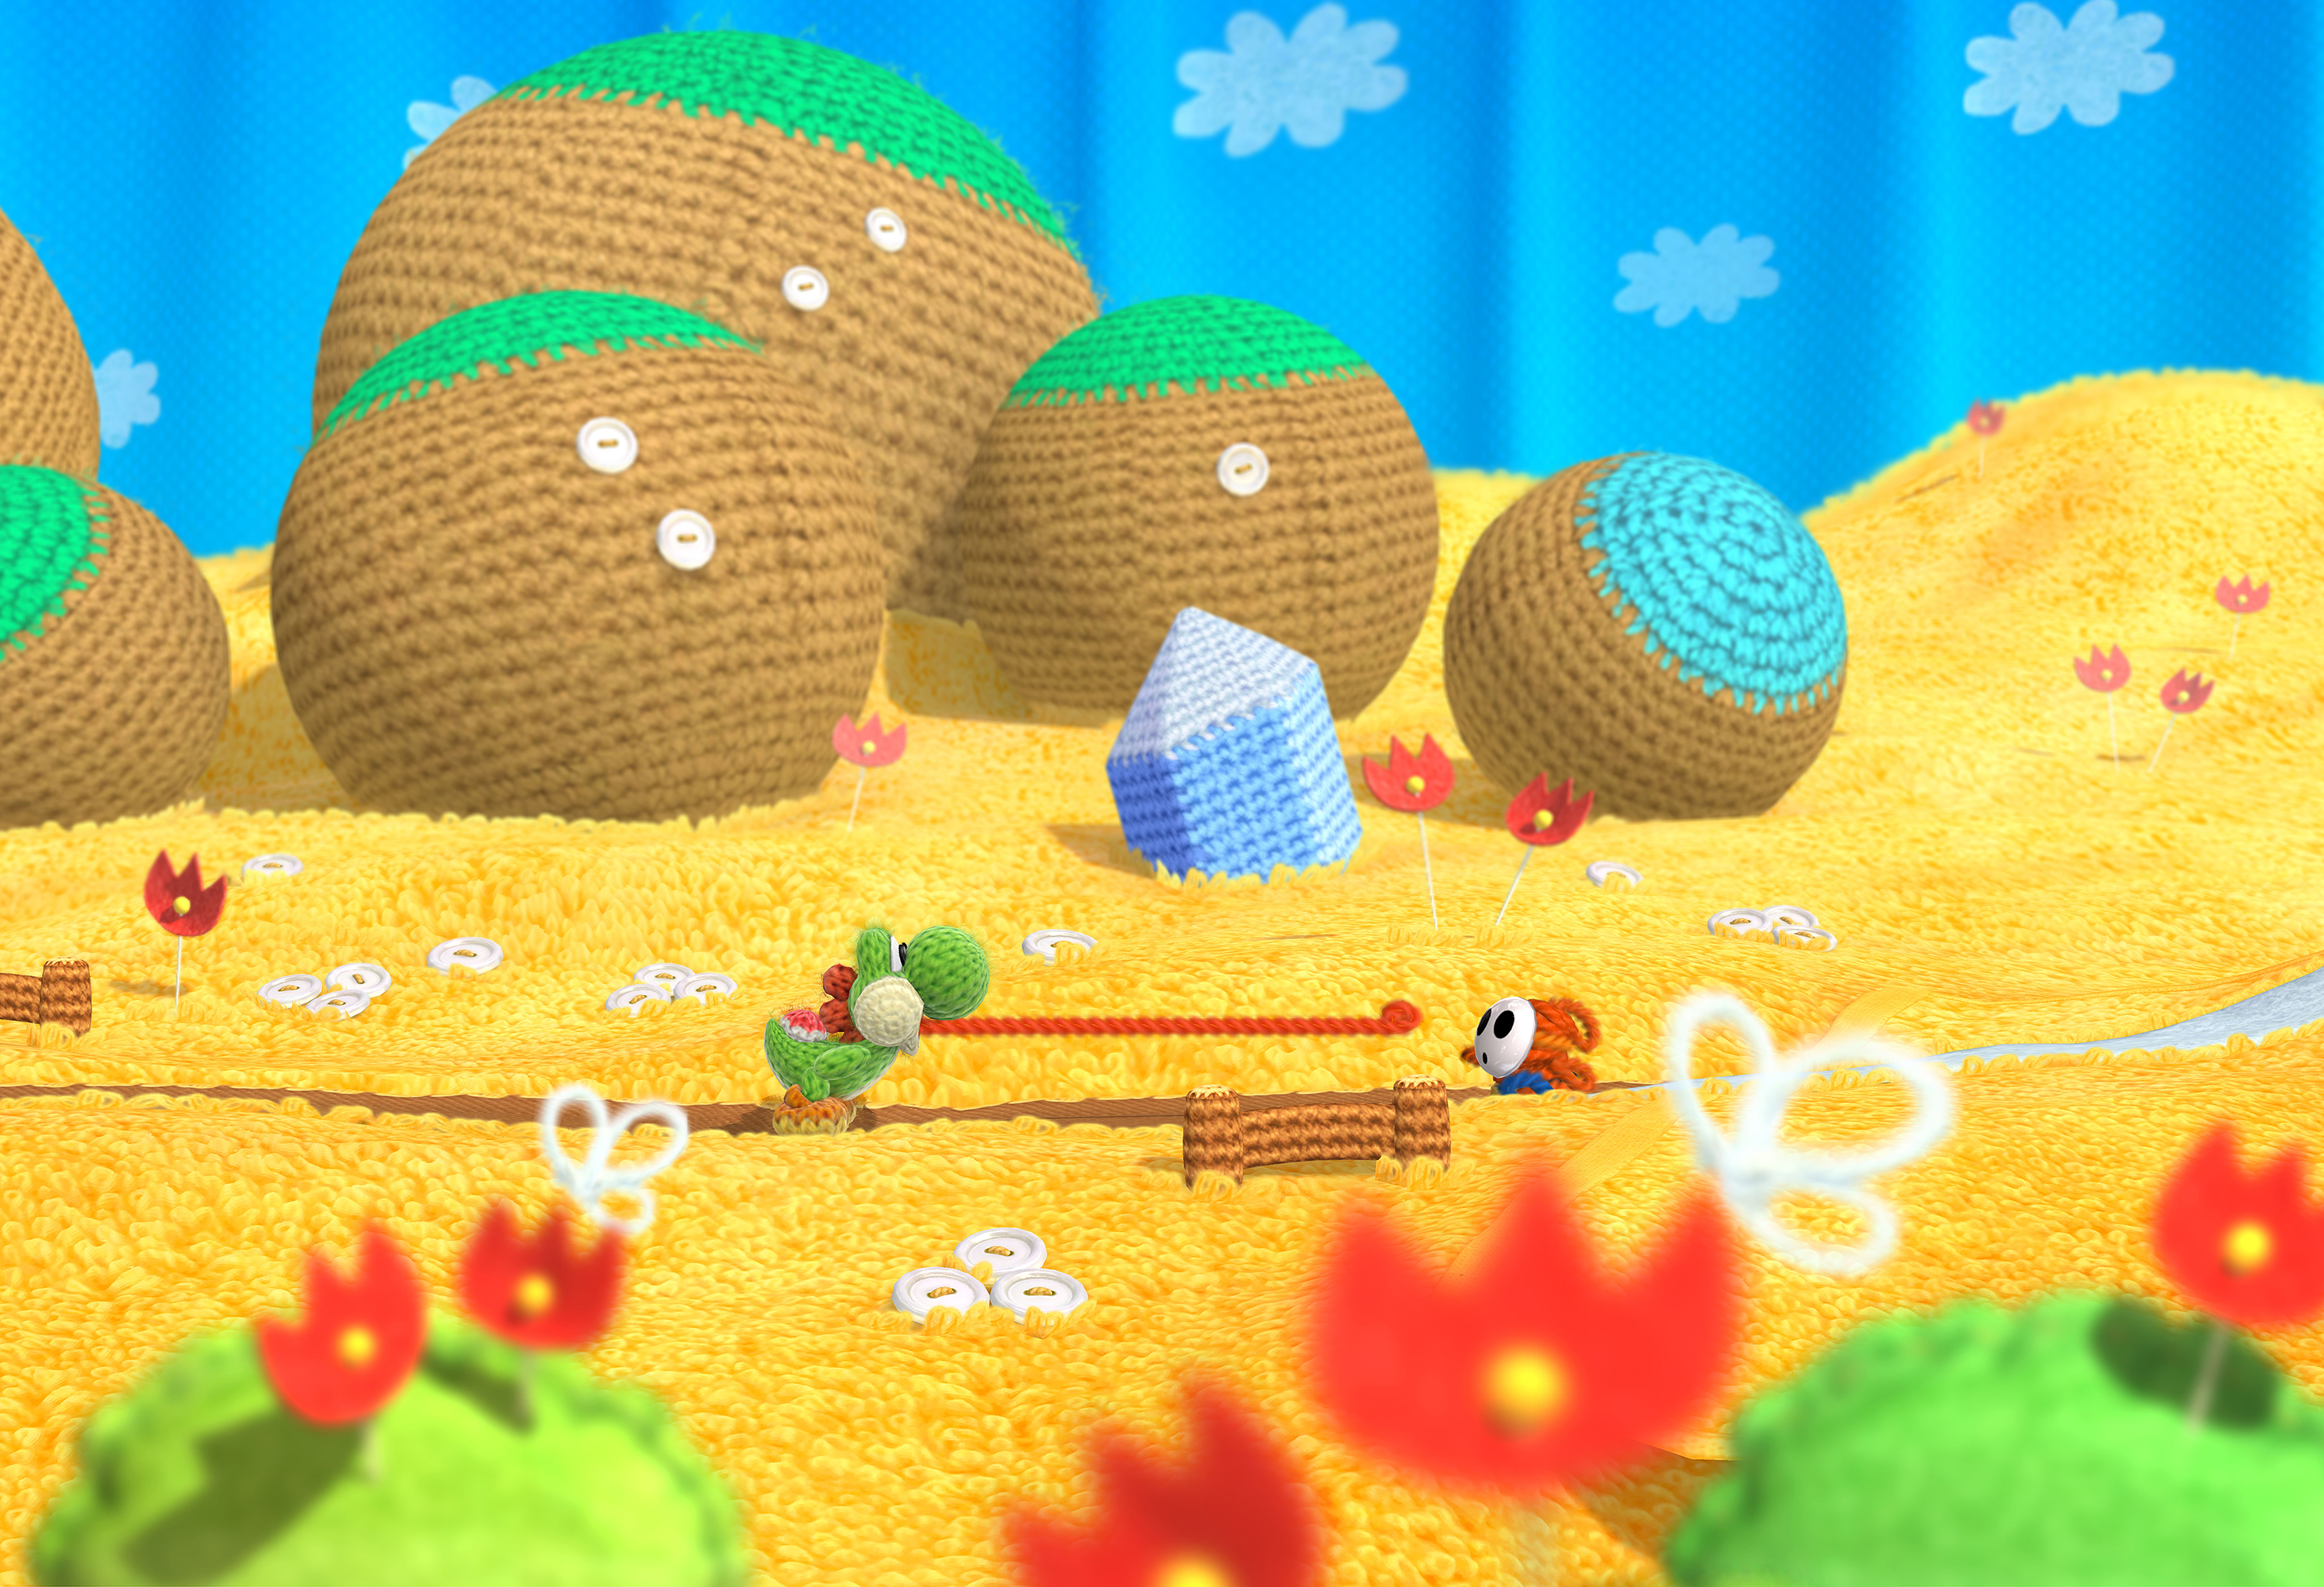 Amazing Yoshi's Woolly World Pictures & Backgrounds